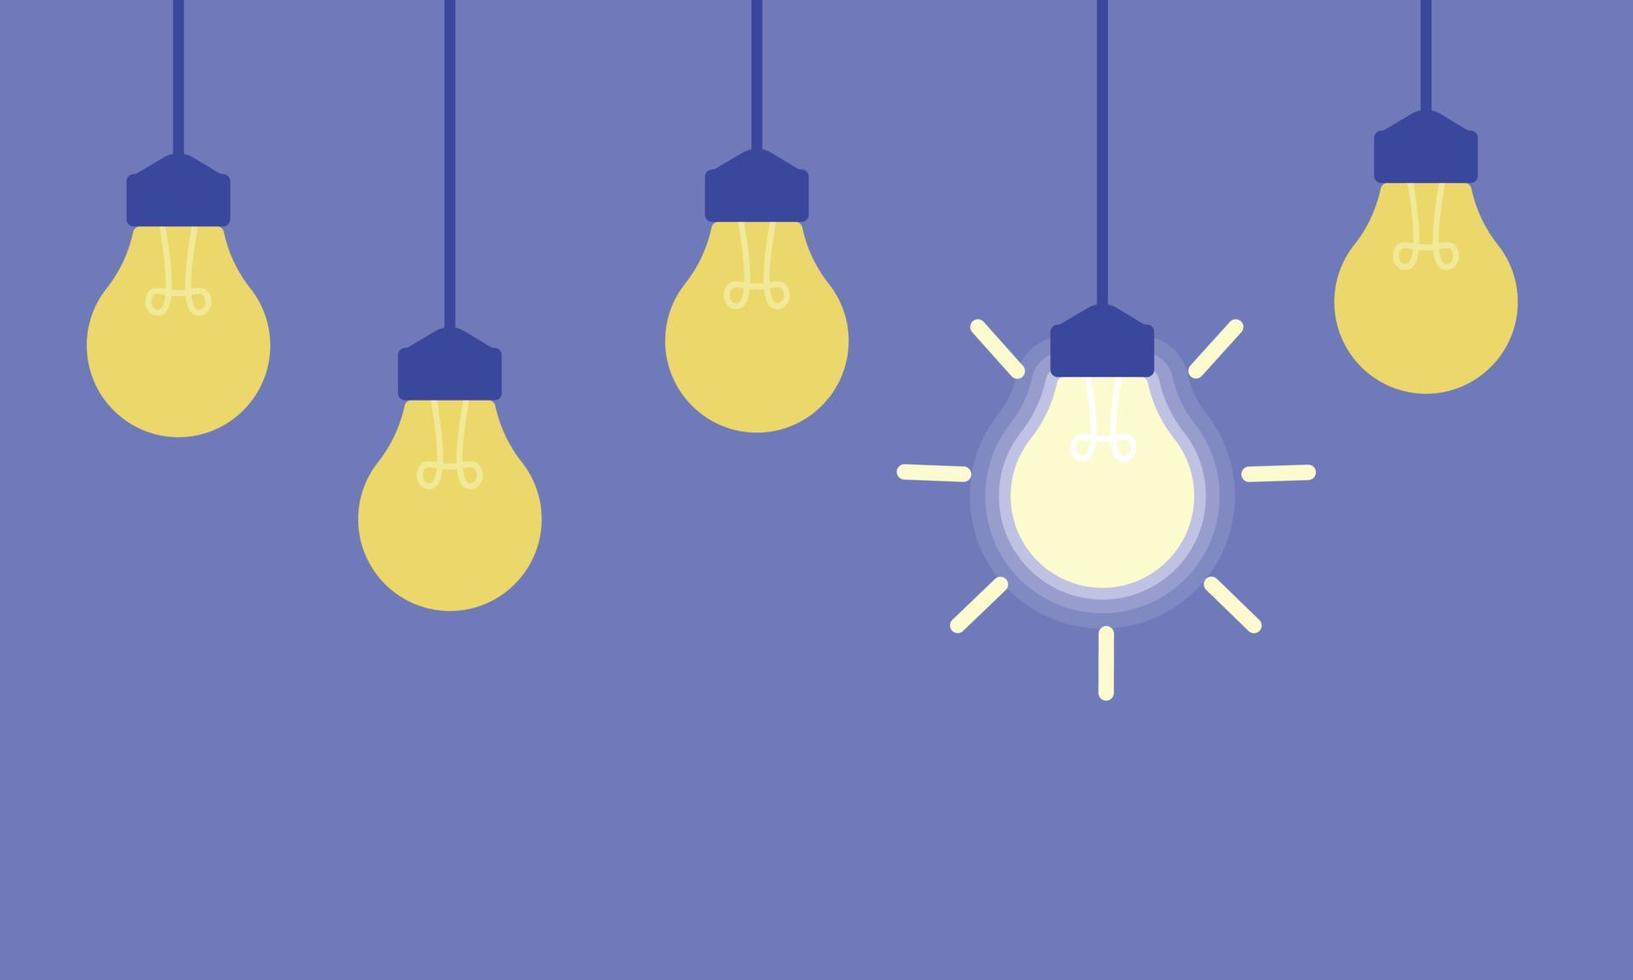 Hanging light bulbs with one glowing on a purple background. Concept of idea vector illustration